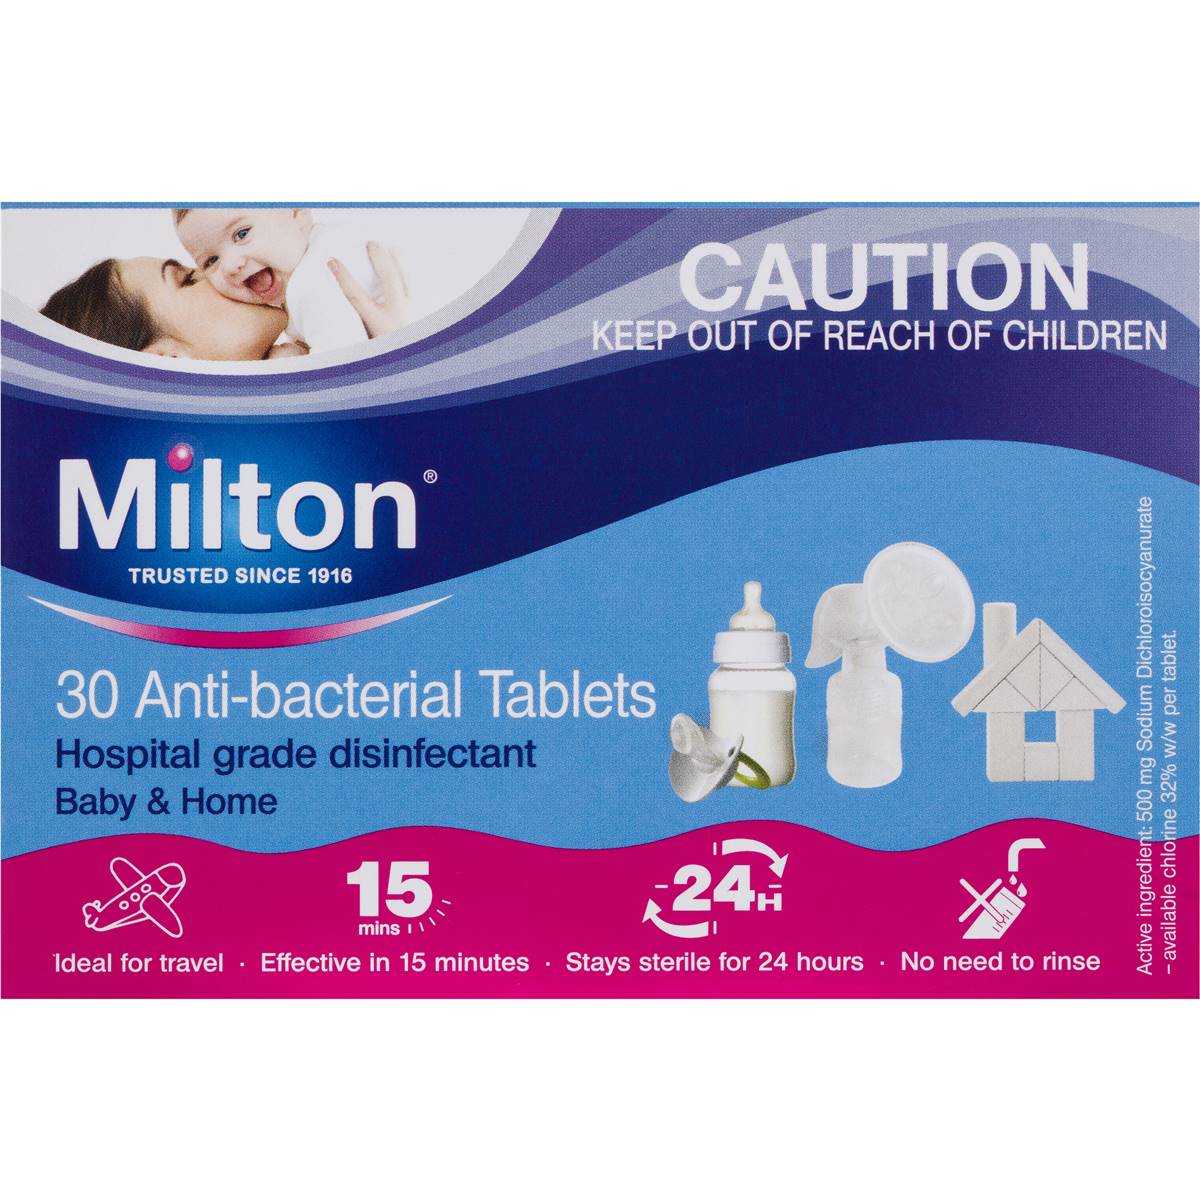 Milton Anti Bacterial Tablets 30 Pack